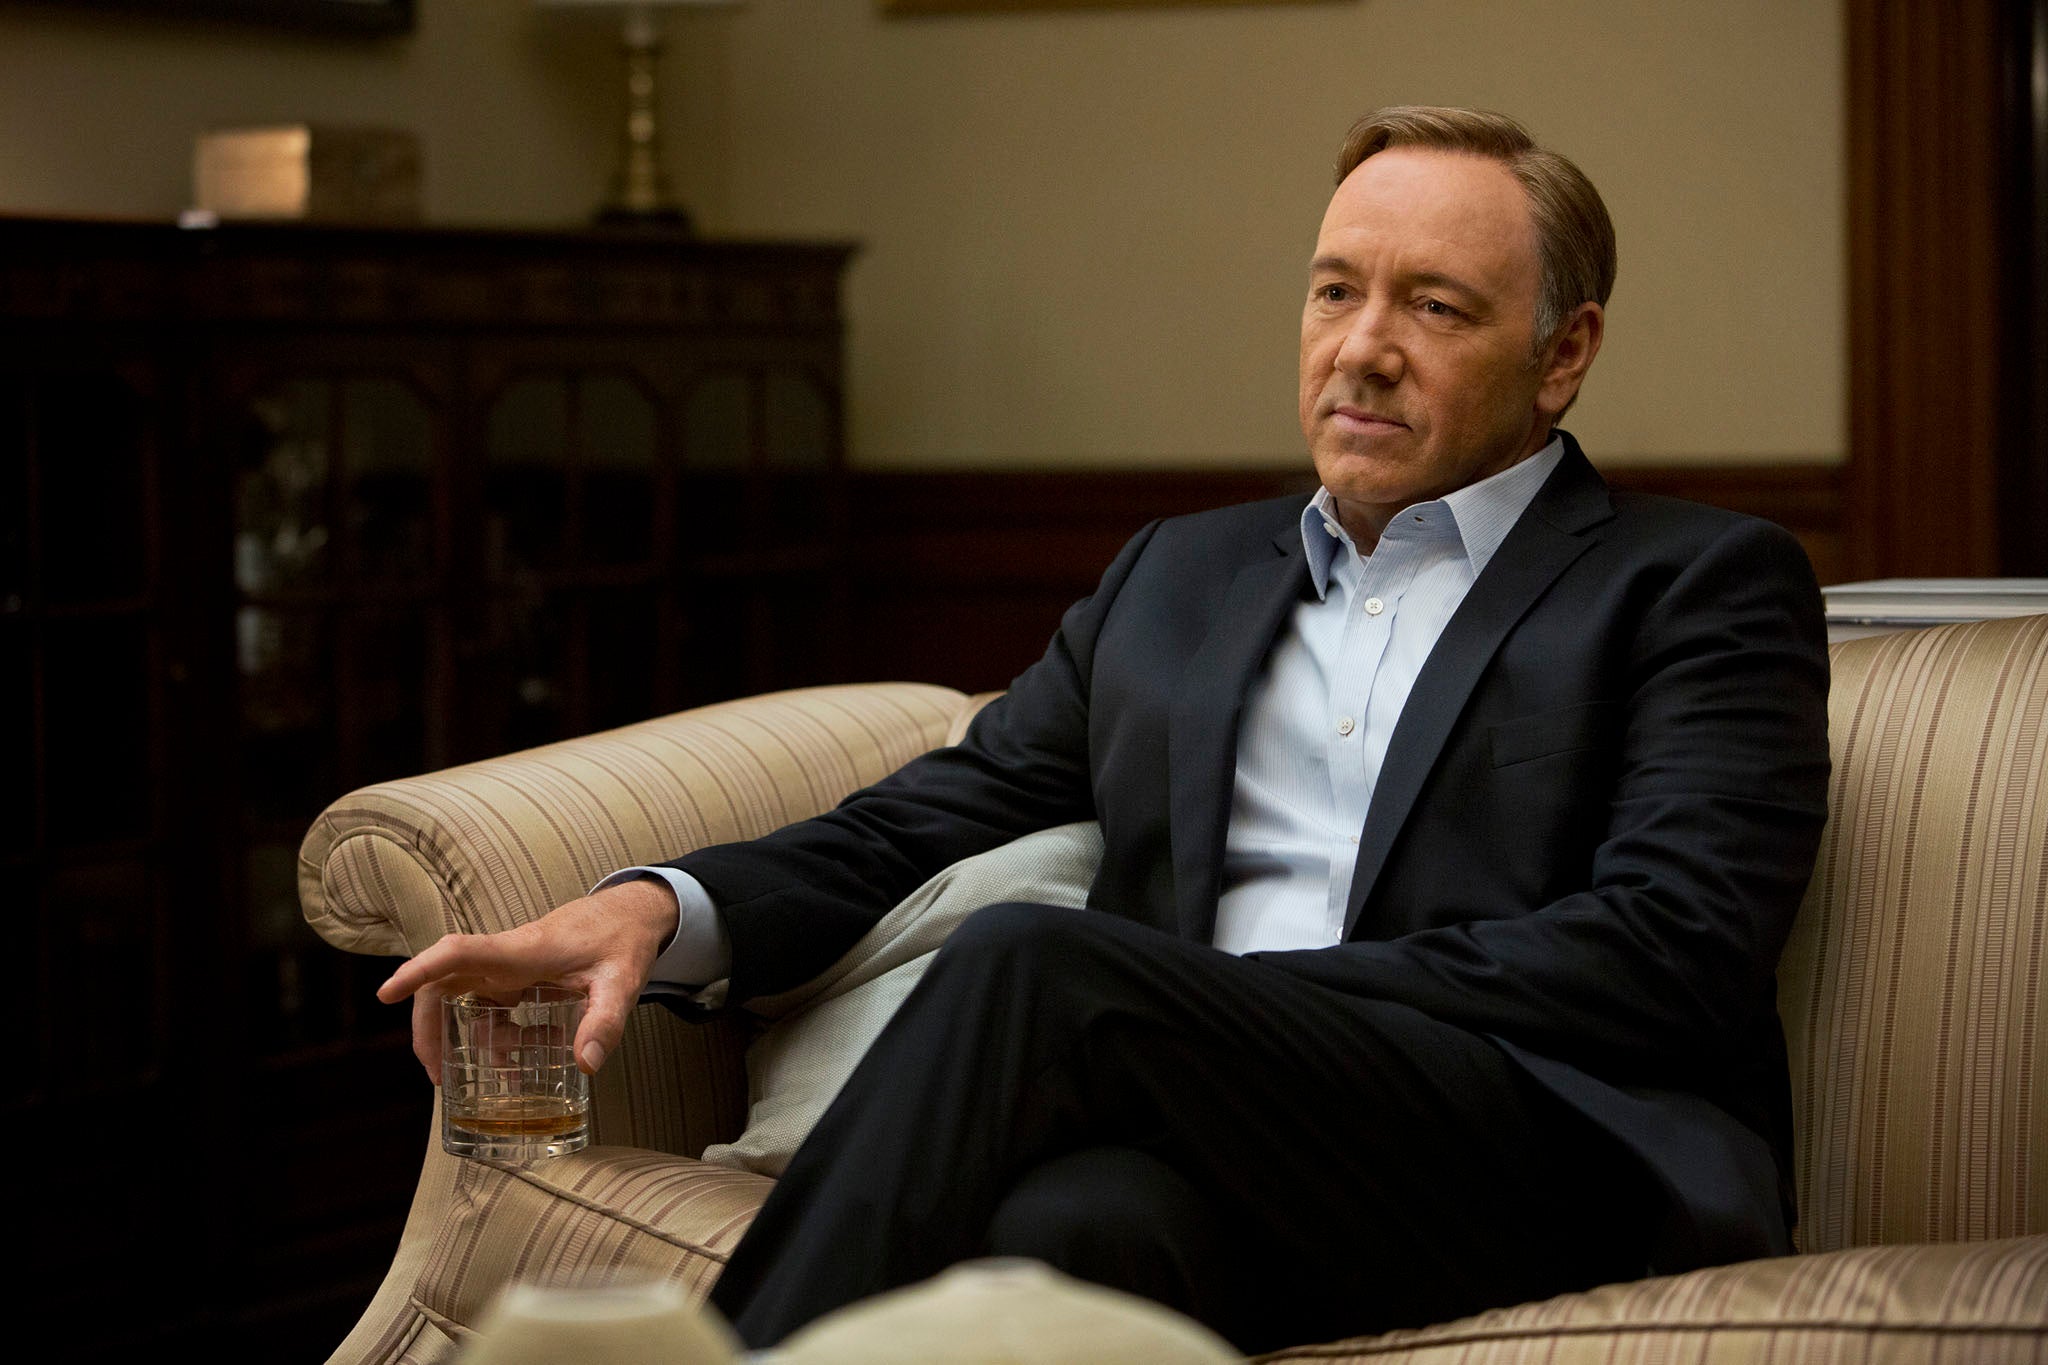 Kevin Spacey in a scene from "House of Cards". The 13-episode series was made available on Netflix earlier this year.